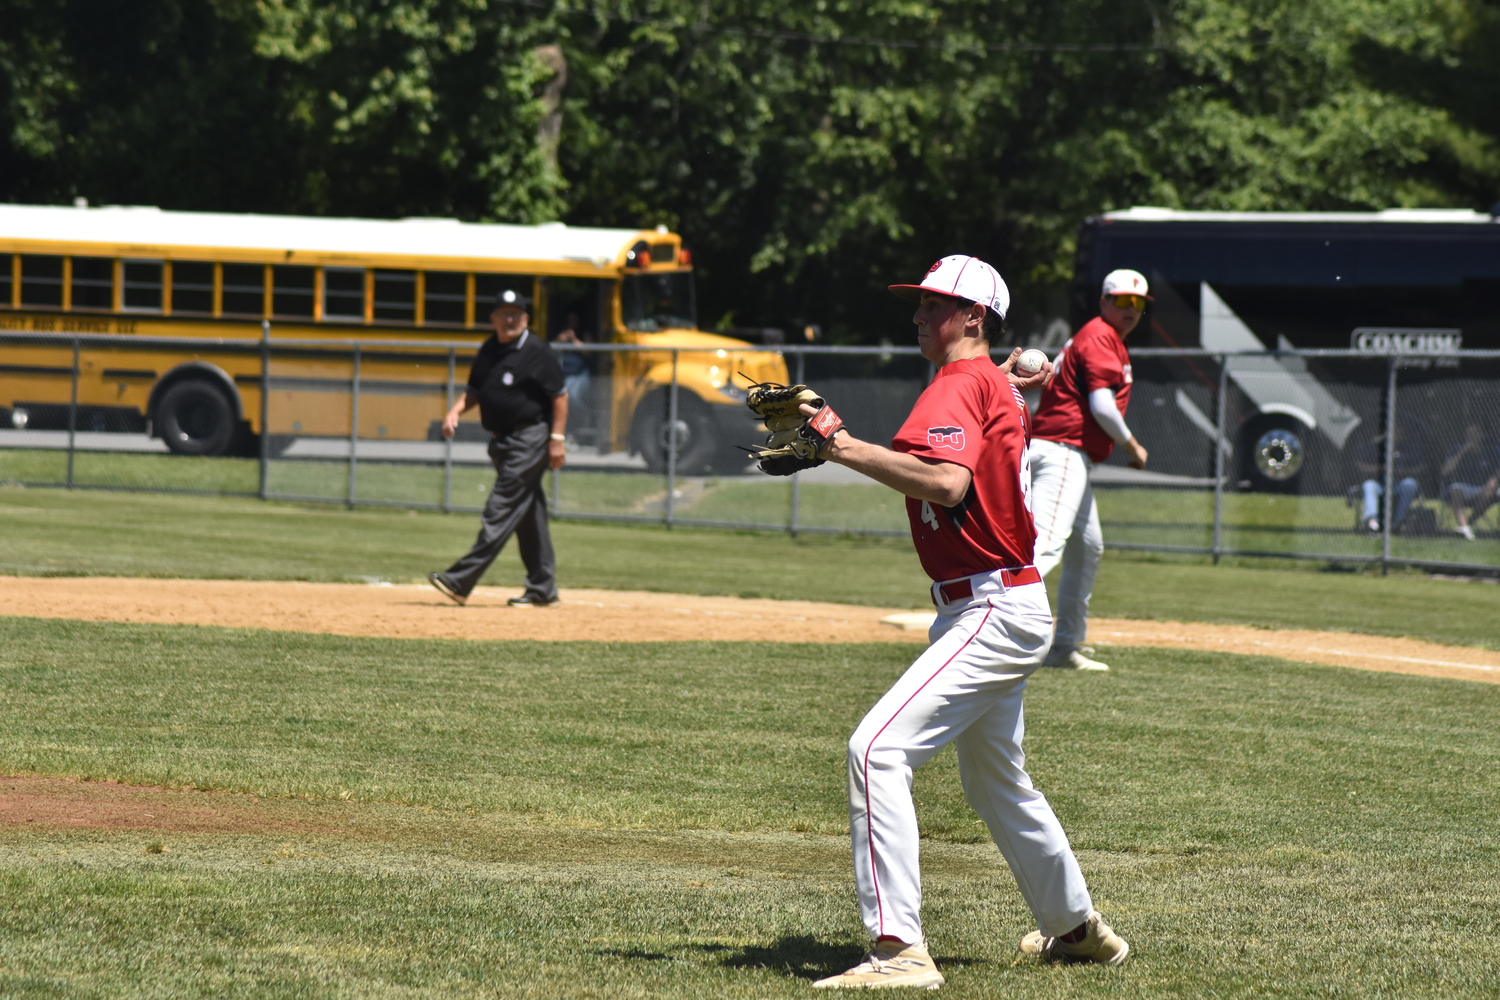 Braeden Mott throws to third base after fielding a bunted ball and gets the force out.   DREW BUDD